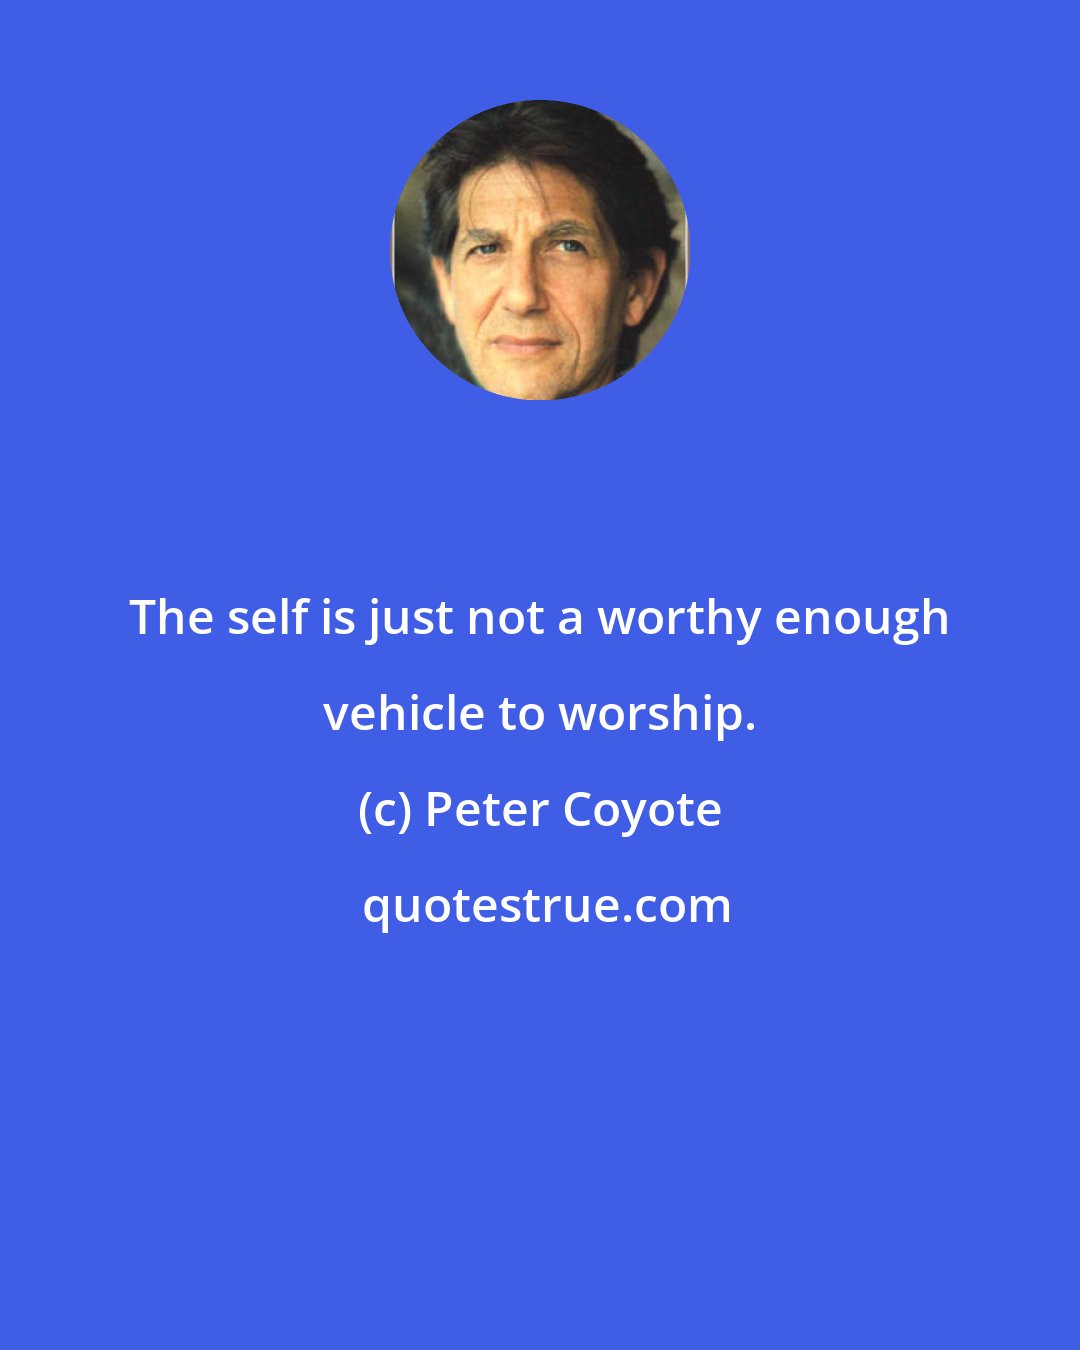 Peter Coyote: The self is just not a worthy enough vehicle to worship.